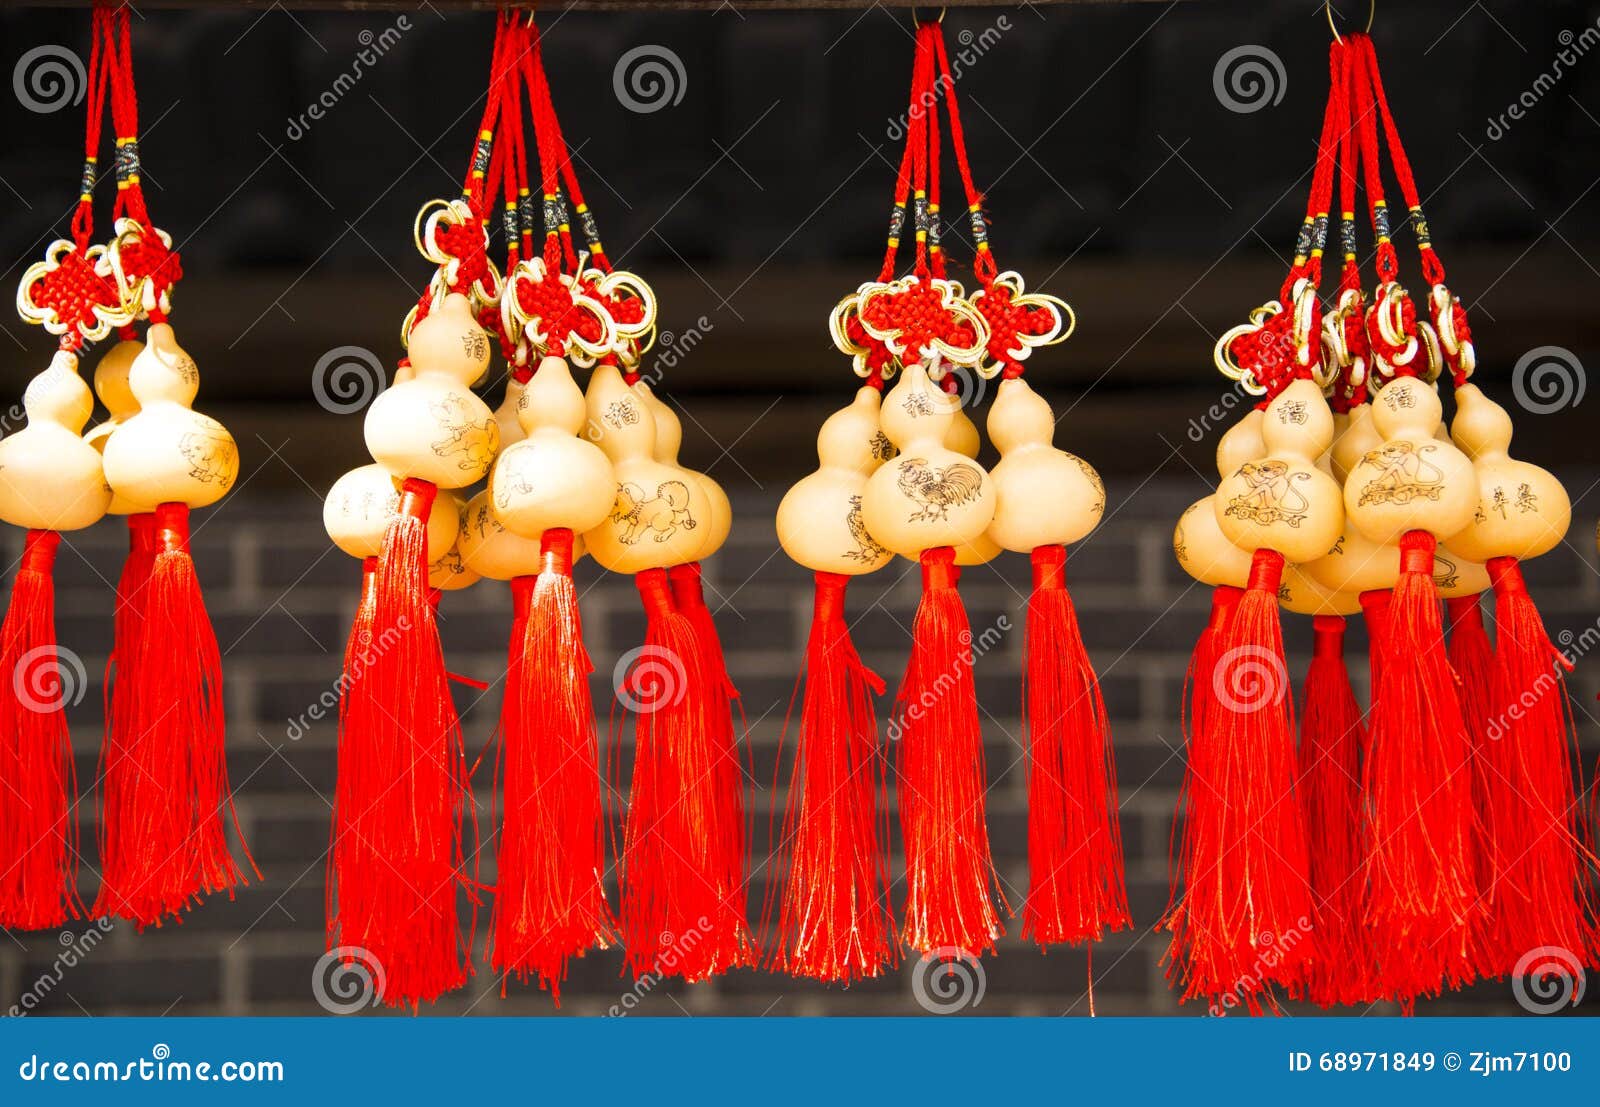 Arts & Crafts, Chinese Knot, Small Gourd Stock Image - Image of objects